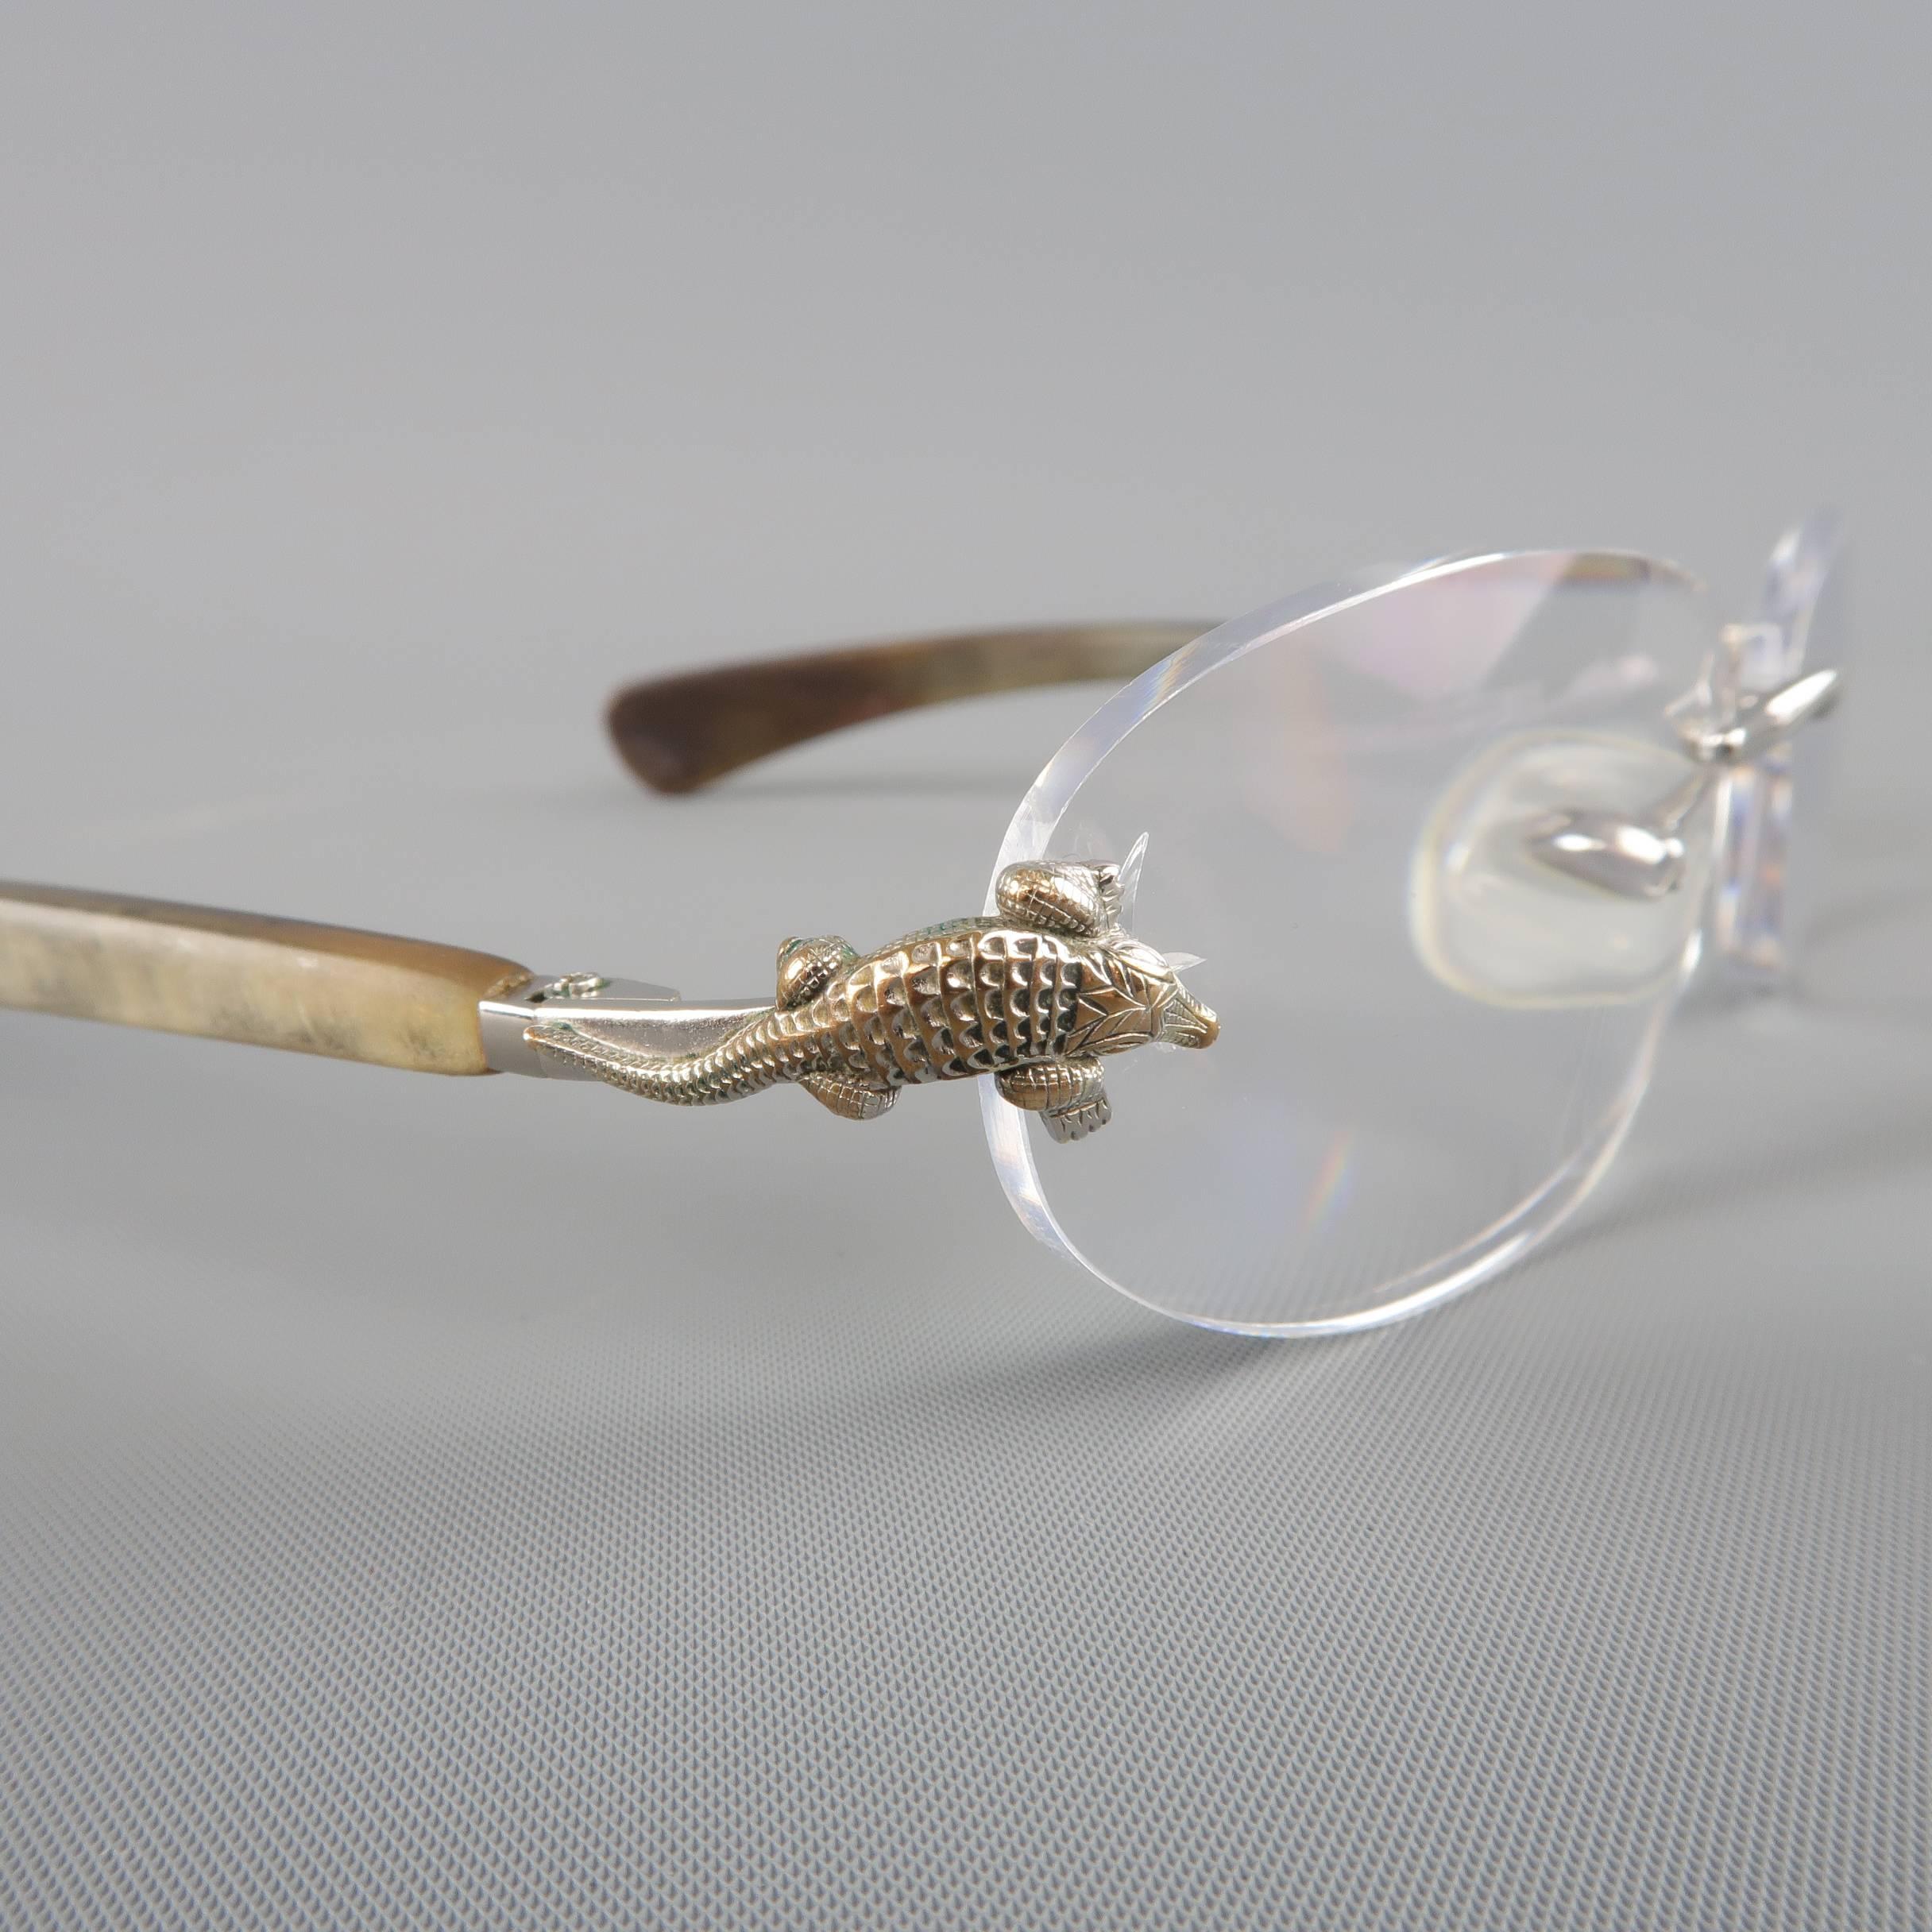 KIESELSTEIN-CORD 'That's A Croc' Taupe Lucite Alligator Frames 2